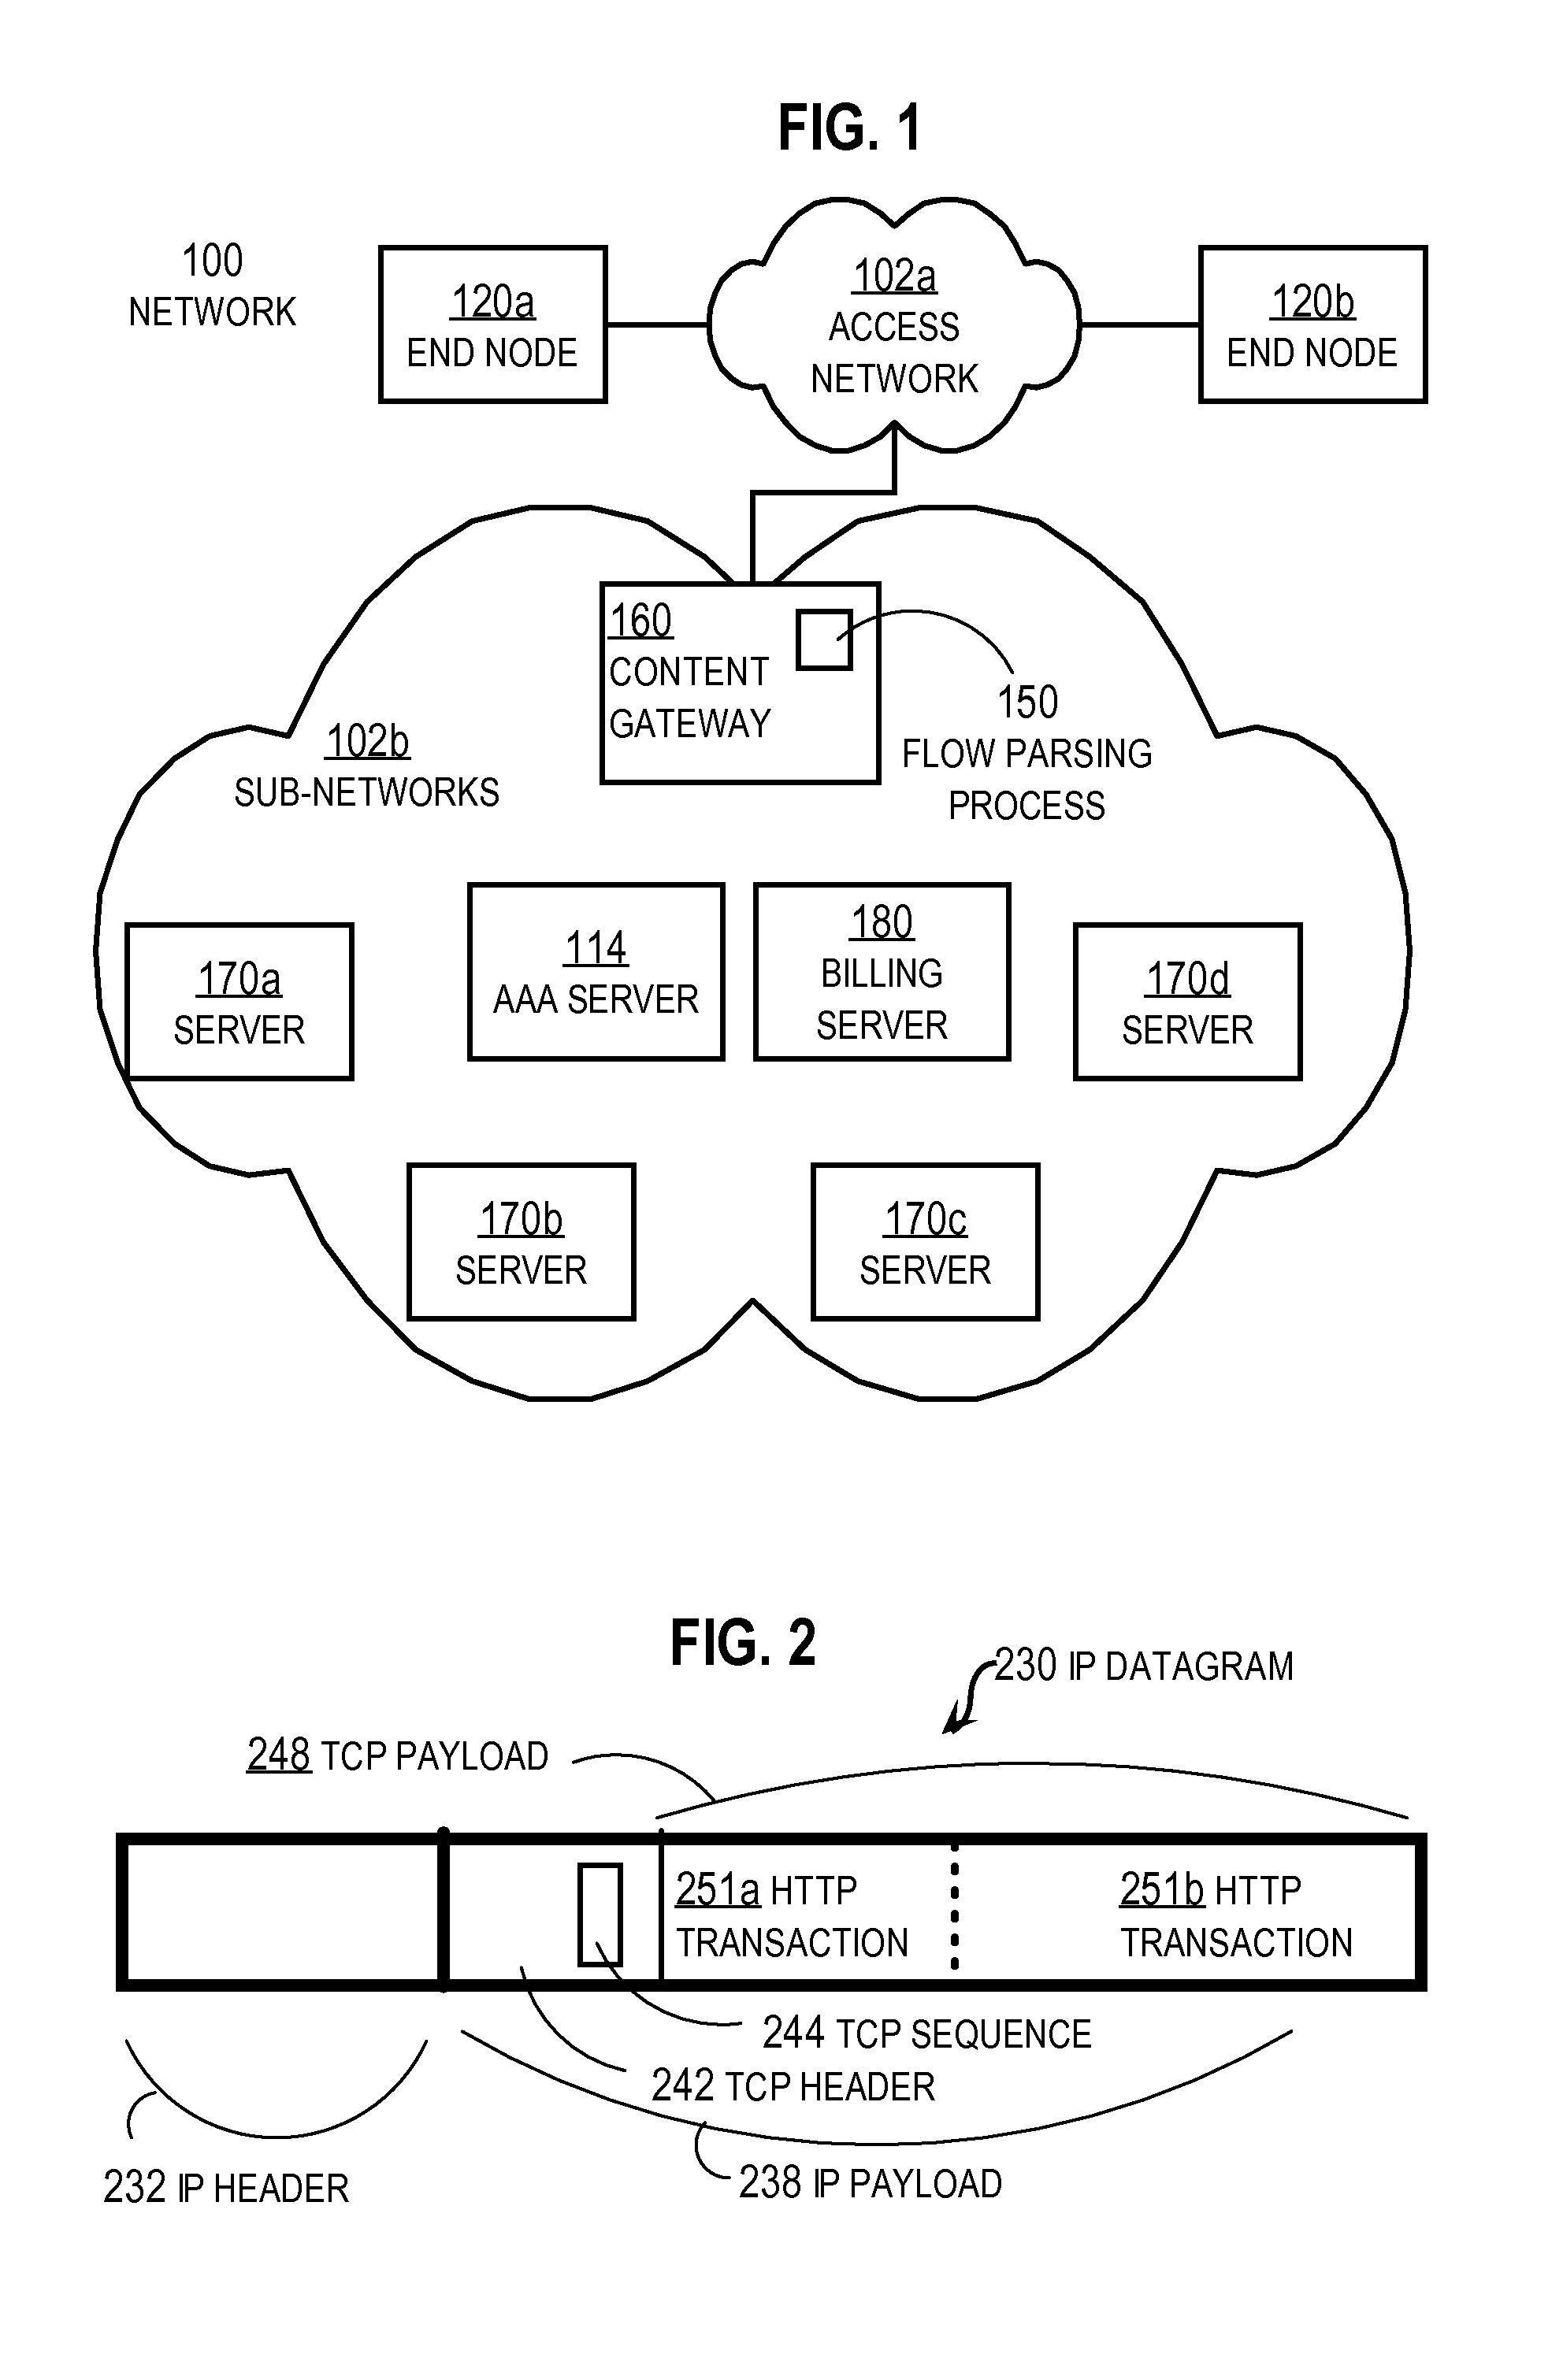 Parsing Out of Order Data Packets at a Content Gateway of a Network